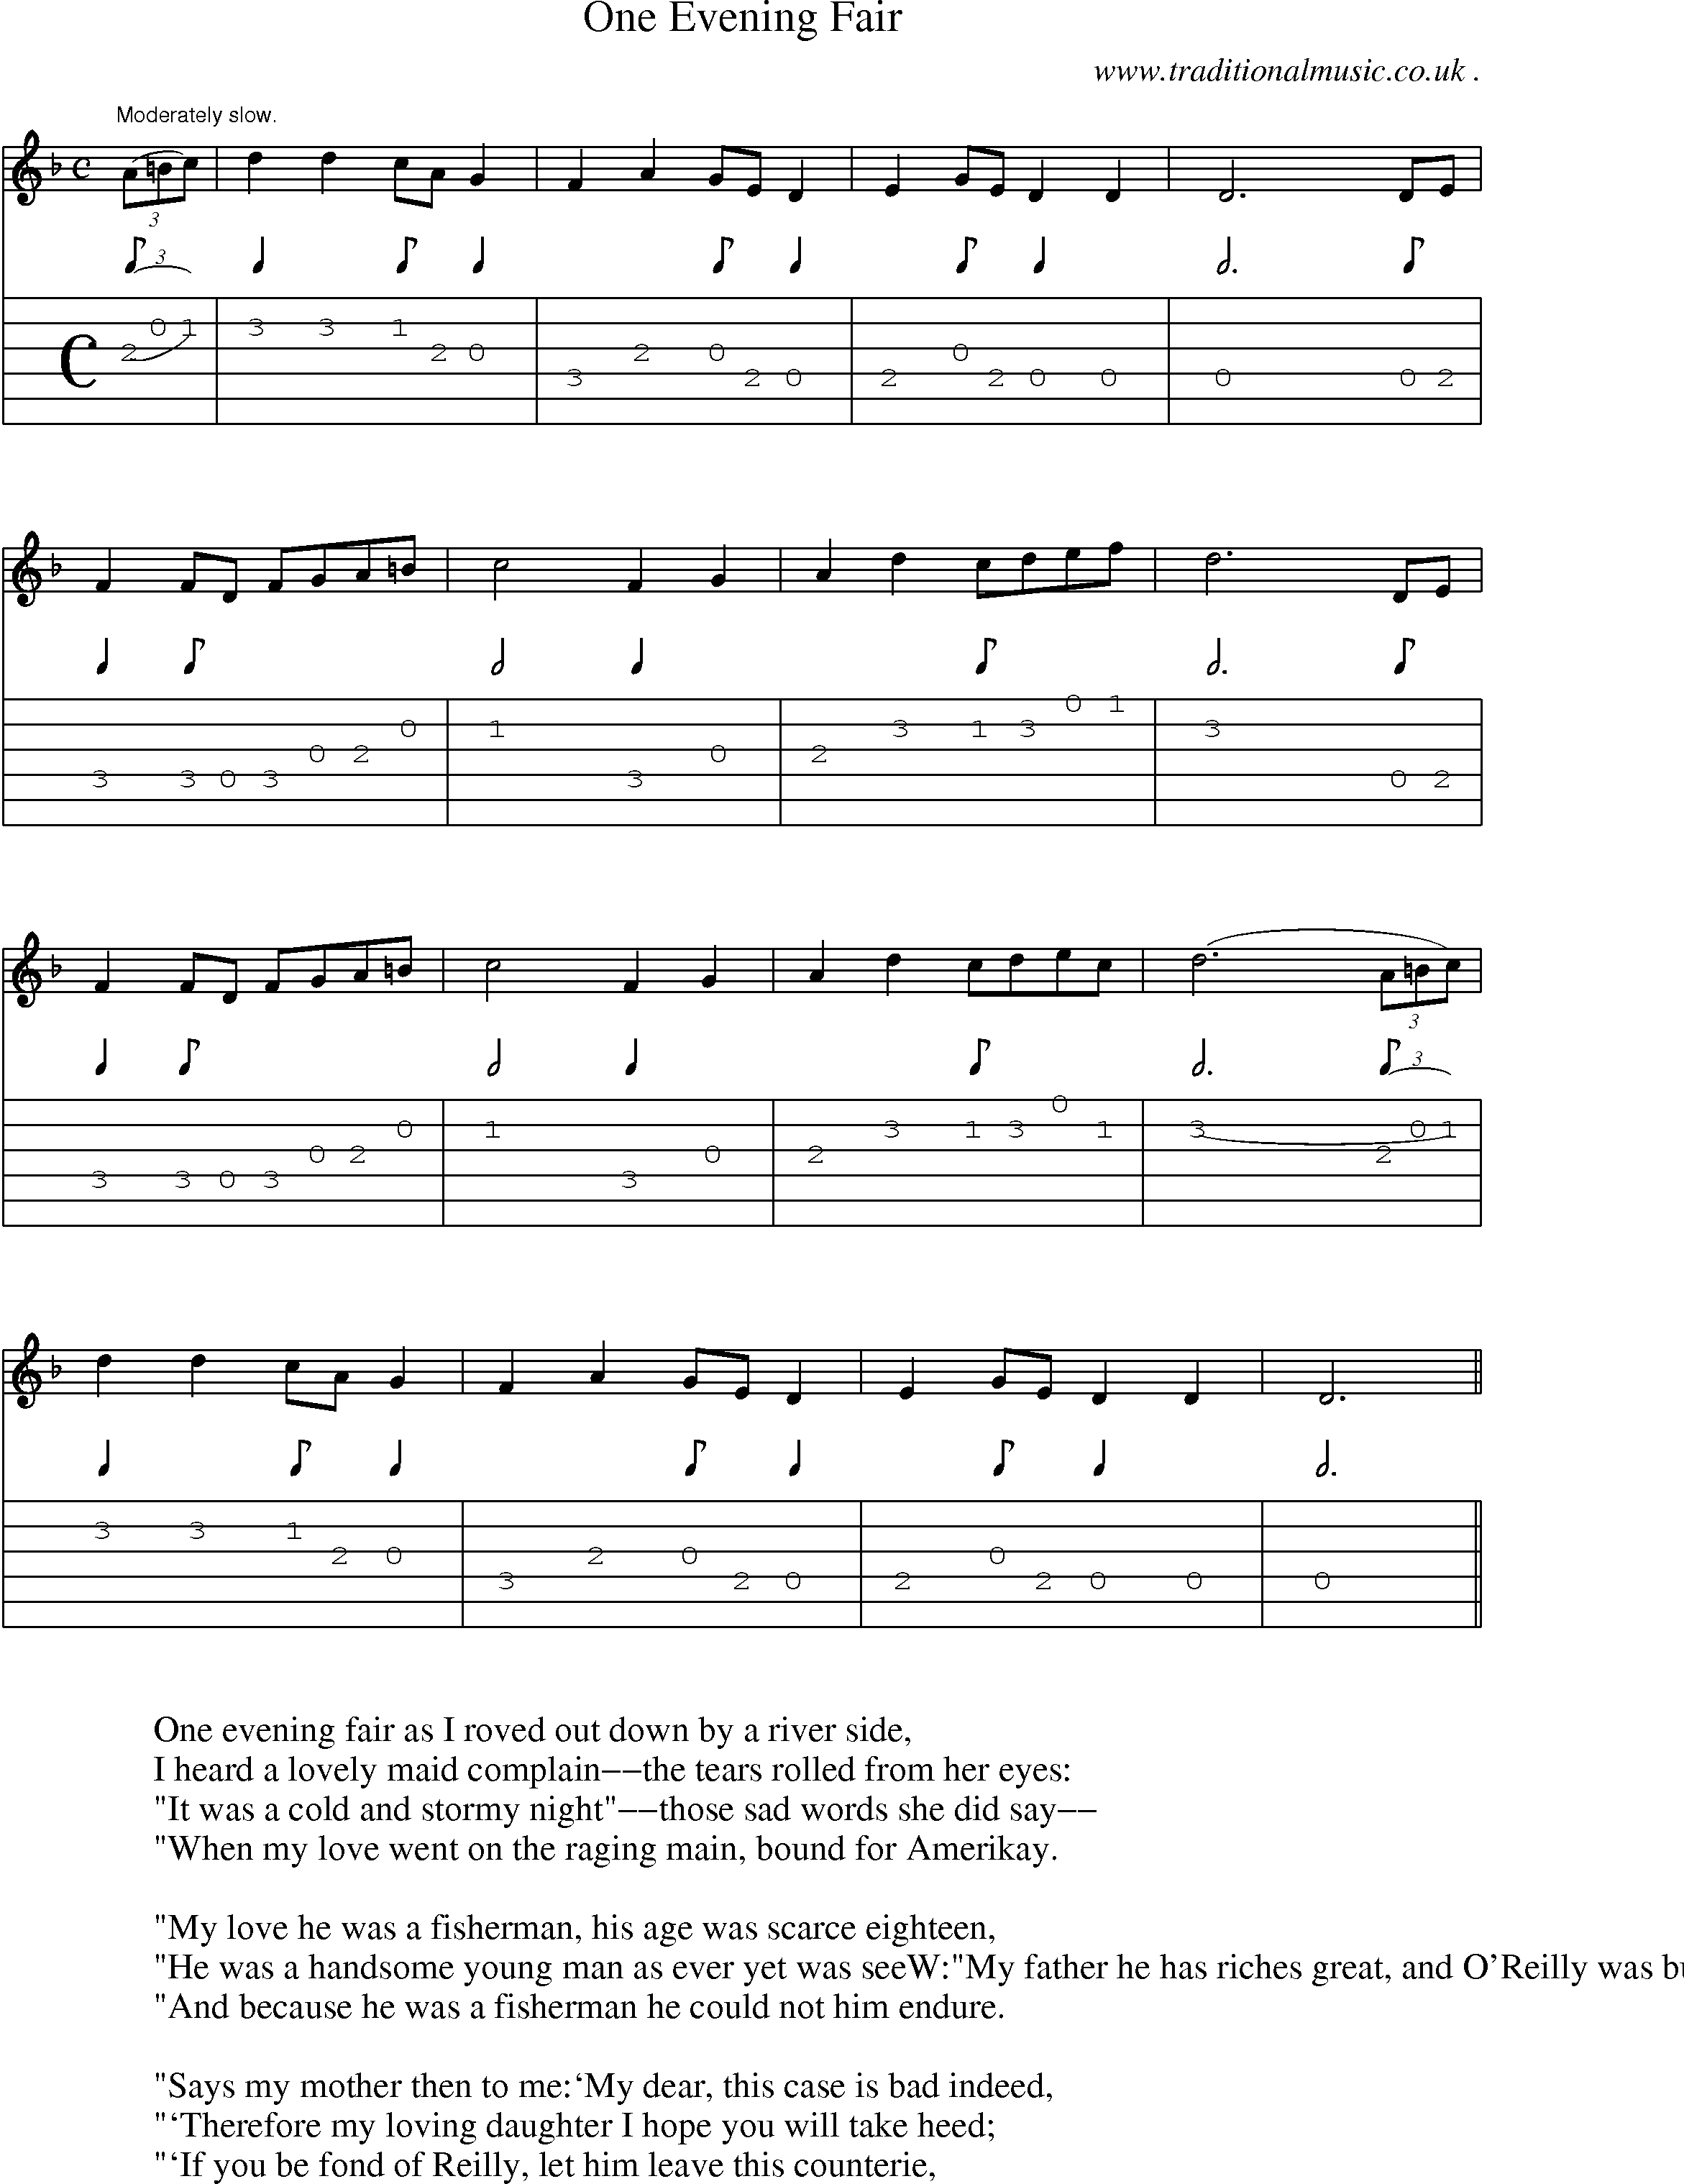 Sheet-Music and Guitar Tabs for One Evening Fair